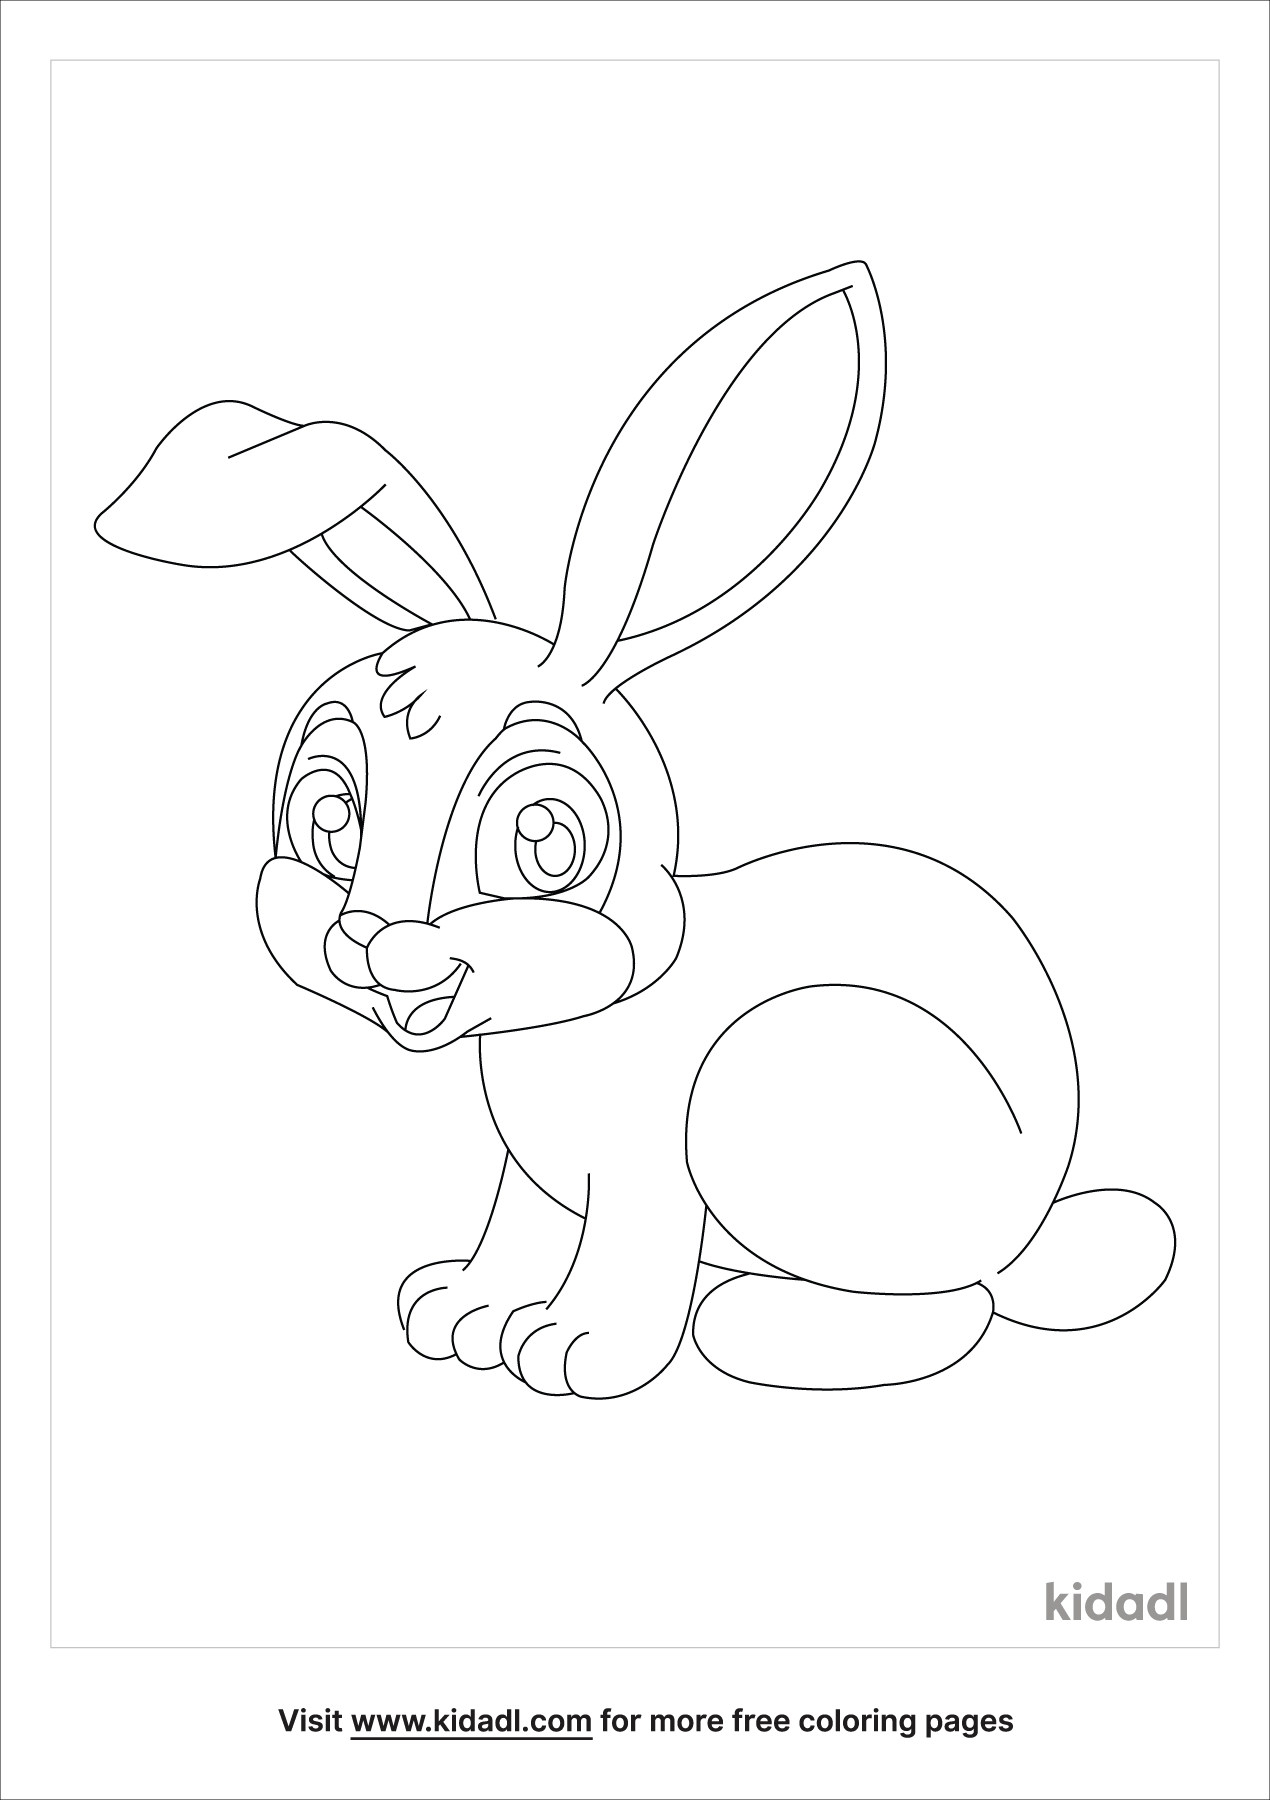 Bunny With Long Ears Coloring Pages | Free Animals Coloring Pages | Kidadl